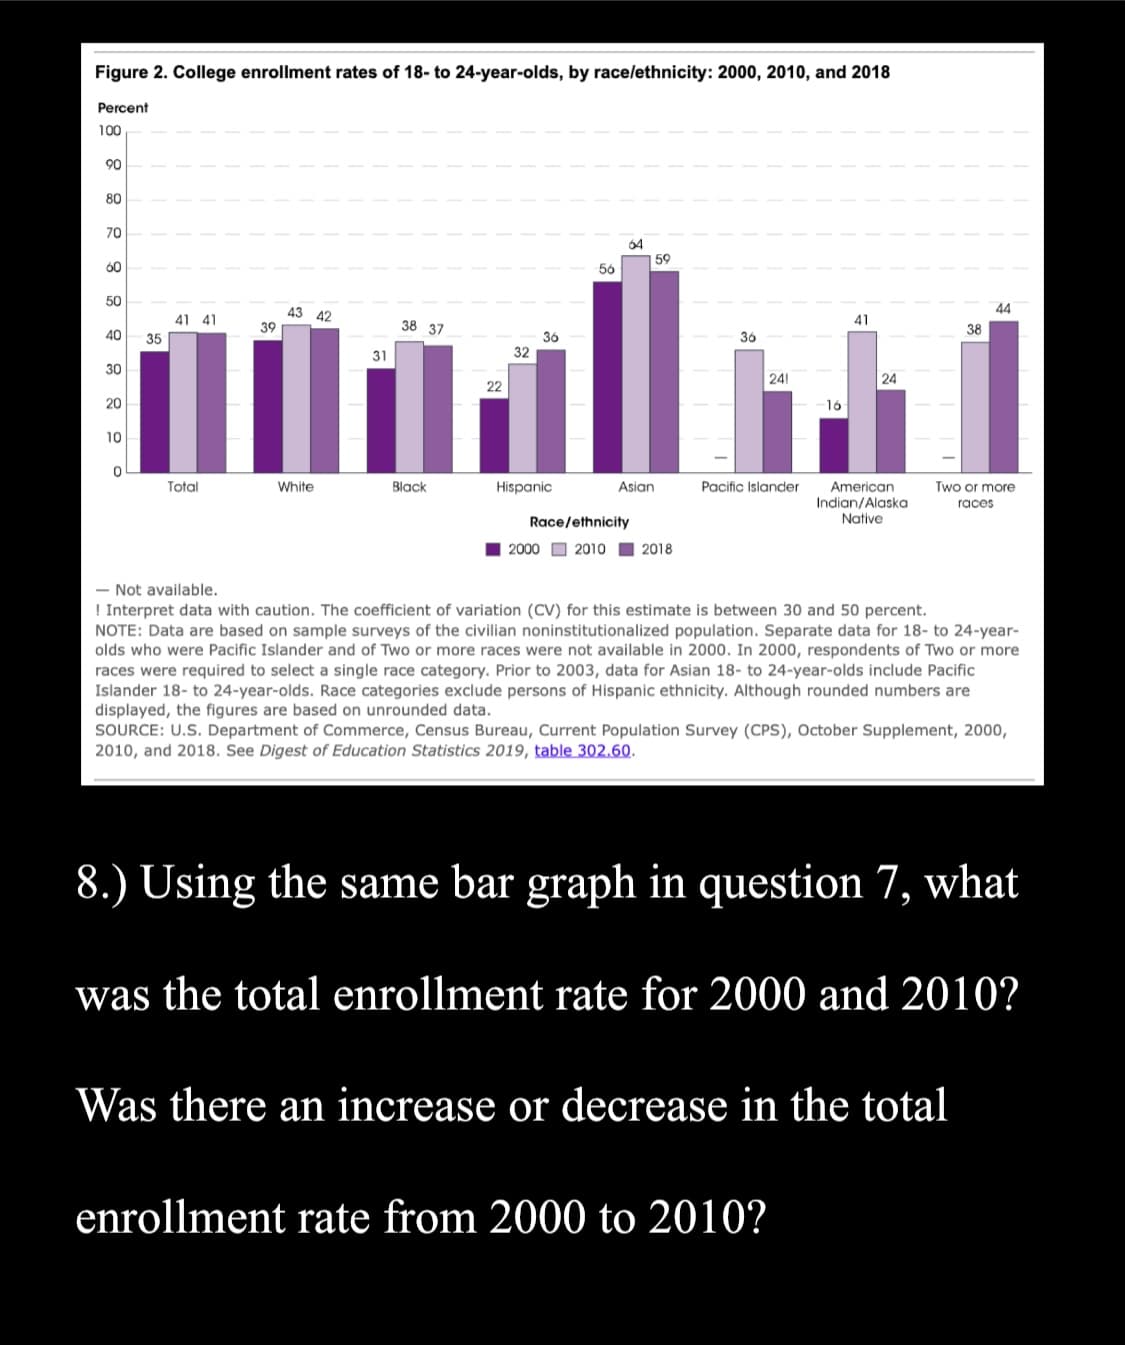 Figure 2. College enrollment rates of 18- to 24-year-olds, by racelethnicity: 2000, 2010, and 2018
Percent
100
90
80
70
64
59
60
56
50
44
43 42
39
41 41
41
38 37
38
40
36
32
35
36
31
30
24!
24
22
20
10
Total
White
Black
Hispanic
Asian
Pacific Islander
American
Two or more
Indian/Alaska
Native
races
Race/ethnicity
2000 O 2010
2018
- Not available.
! Interpret data with caution. The coefficient of variation (CV) for this estimate is between 30 and 50 percent.
NOTE: Data are based on sample surveys of the civilian noninstitutionalized population. Separate data for 18- to 24-year-
olds who were Pacific Islander and of Two or more races were not available in 2000. In 2000, respondents of Two or more
races were required to select a single race category. Prior to 2003, data for Asian 18- to 24-year-olds include Pacific
Islander 18- to 24-year-olds. Race categories exclude persons of Hispanic ethnicity. Although rounded numbers are
displayed, the figures are based on unrounded data.
SOURCE: U.S. Department of Commerce, Census Bureau, Current Population Survey (CPS), October Supplement, 2000,
2010, and 2018. See Digest of Education Statistics 2019, table 302.60.
8.) Using the same bar graph in question 7, what
was the total enrollment rate for 2000 and 2010?
Was there an increase or decrease in the total
enrollment rate from 2000 to 2010?
